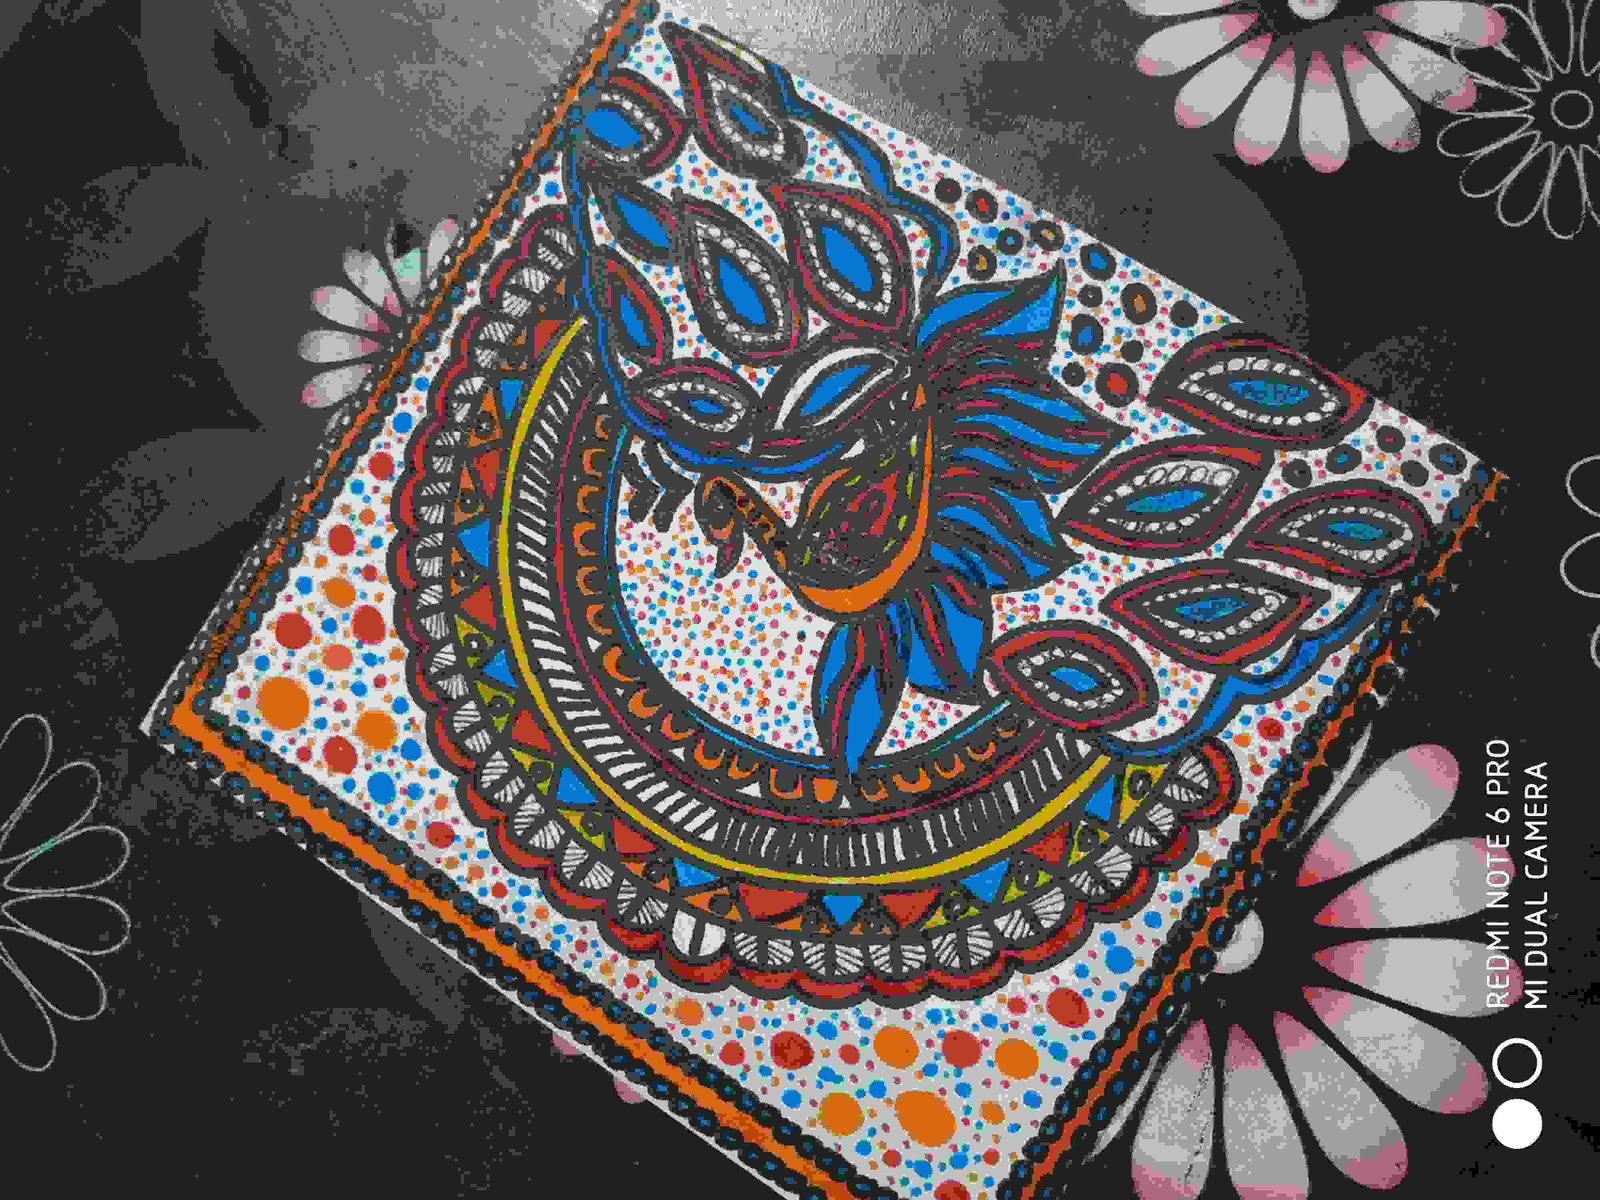 Painting Of Painting In Mandala Art Size Small Size Sq Cm